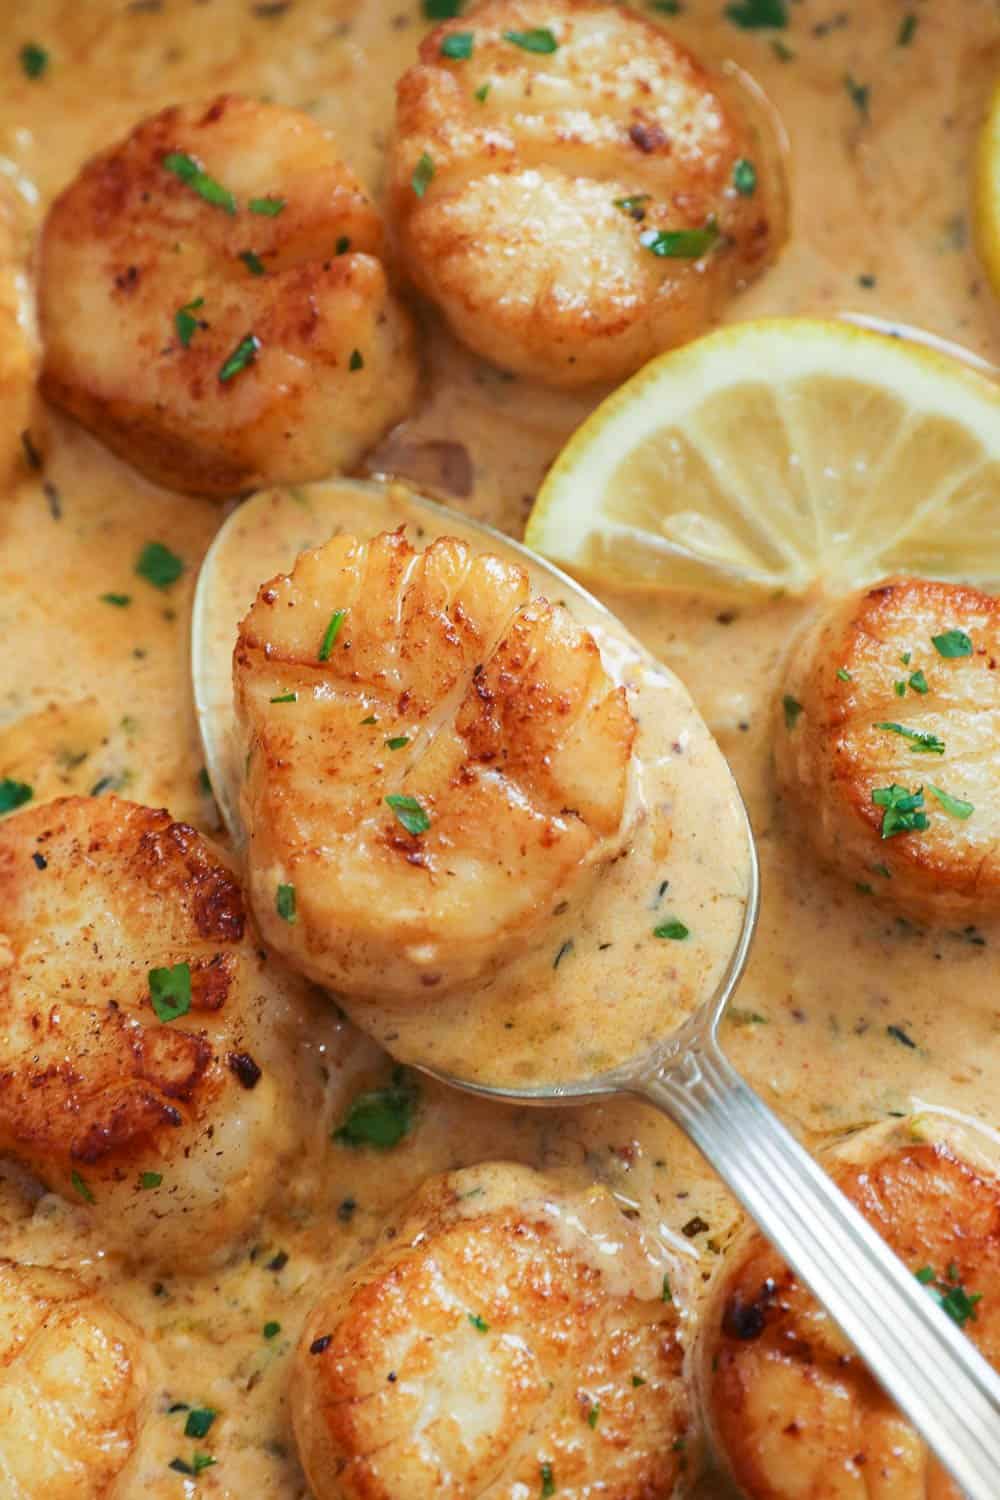 Scallops in cream with one on a spoon ready to try